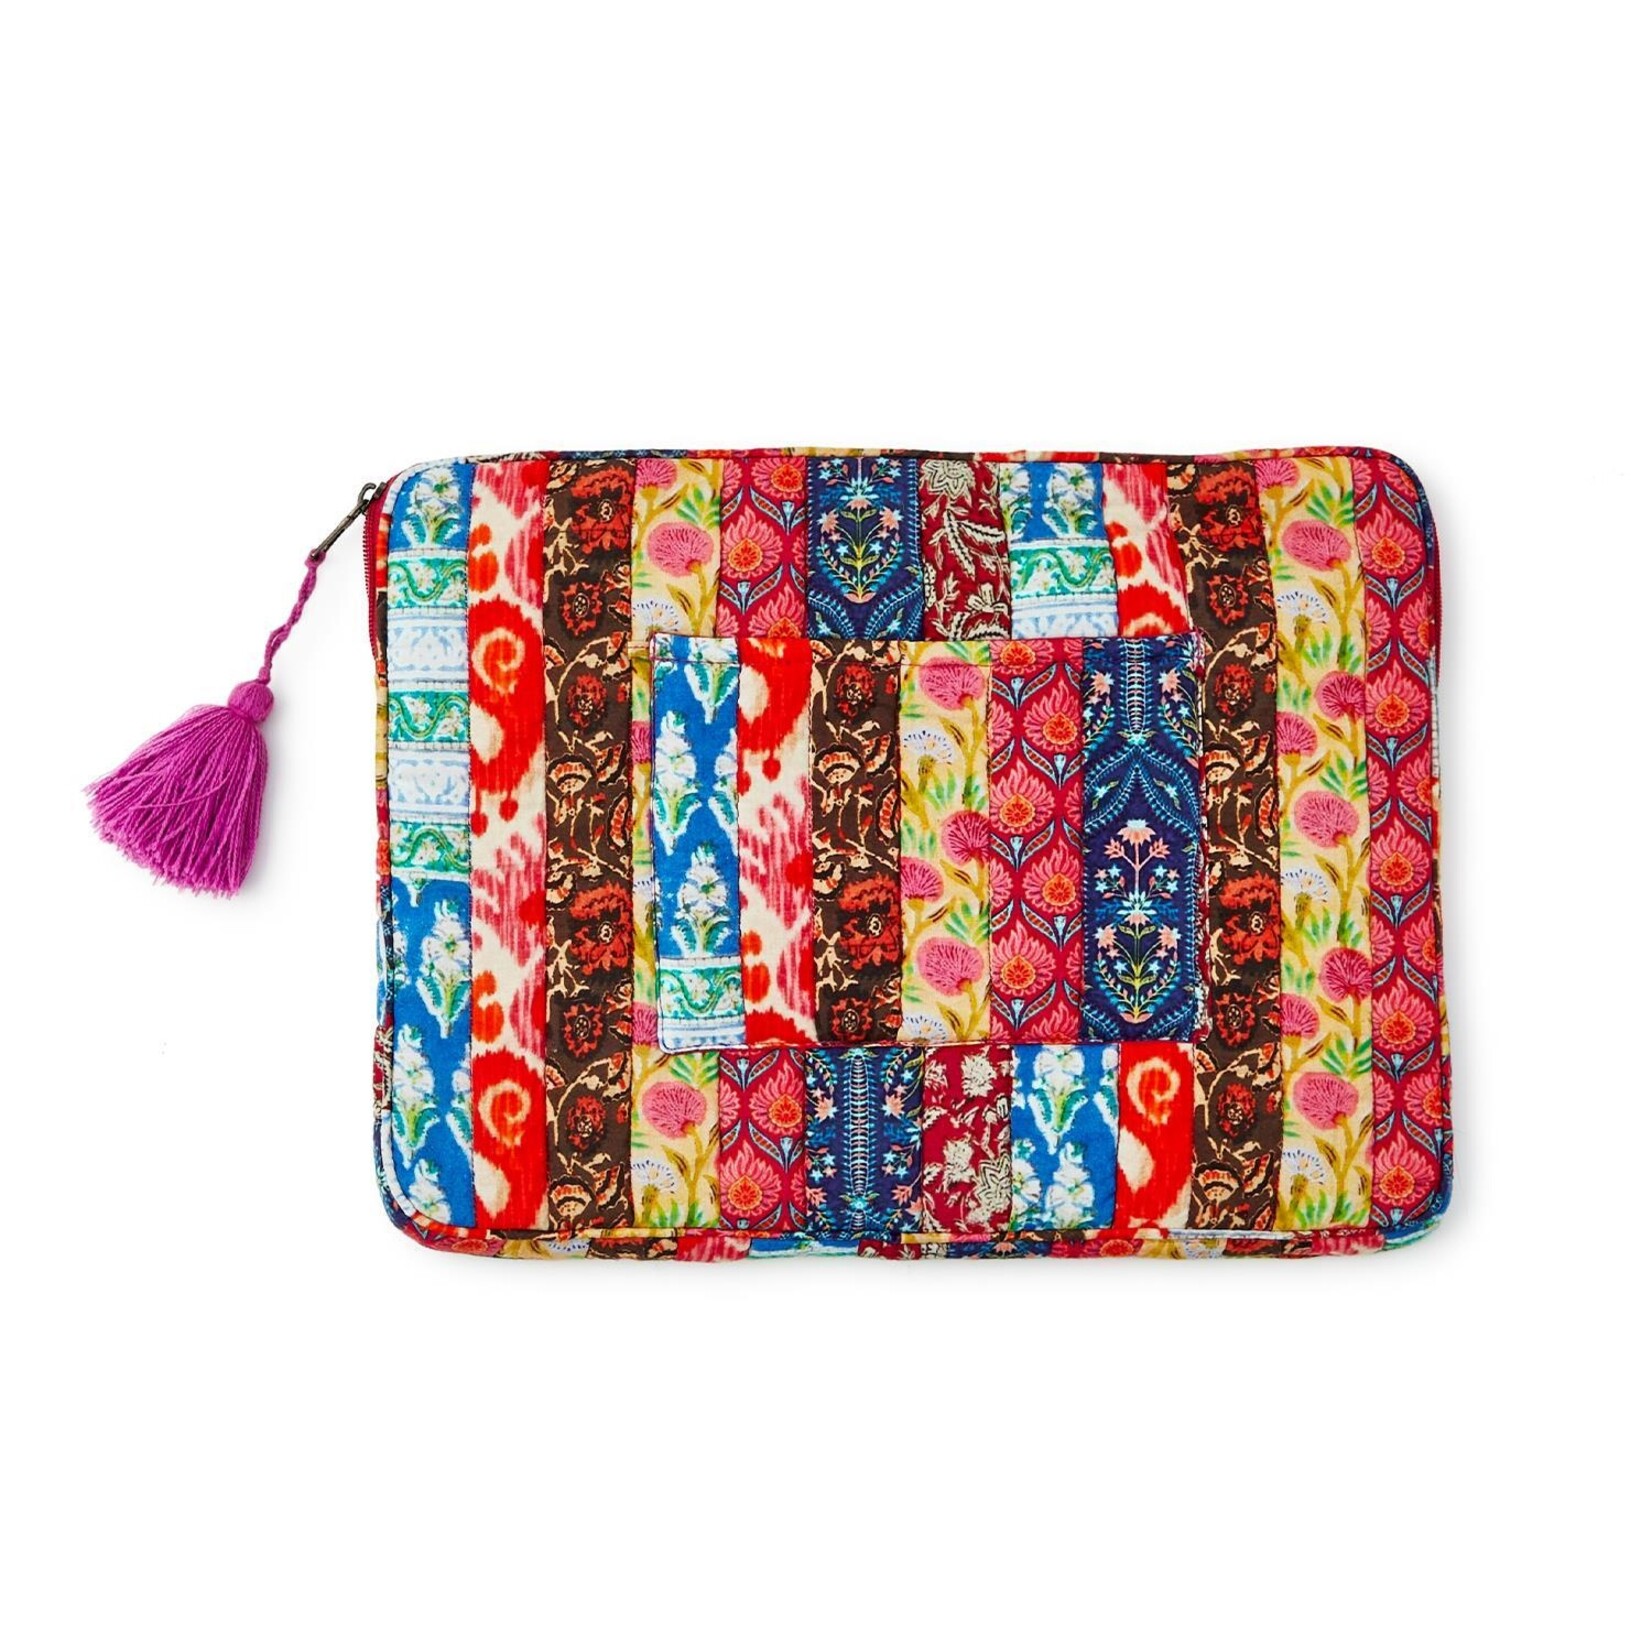 Two's Company Stow Away Laptop Pouch in Printed Fabric